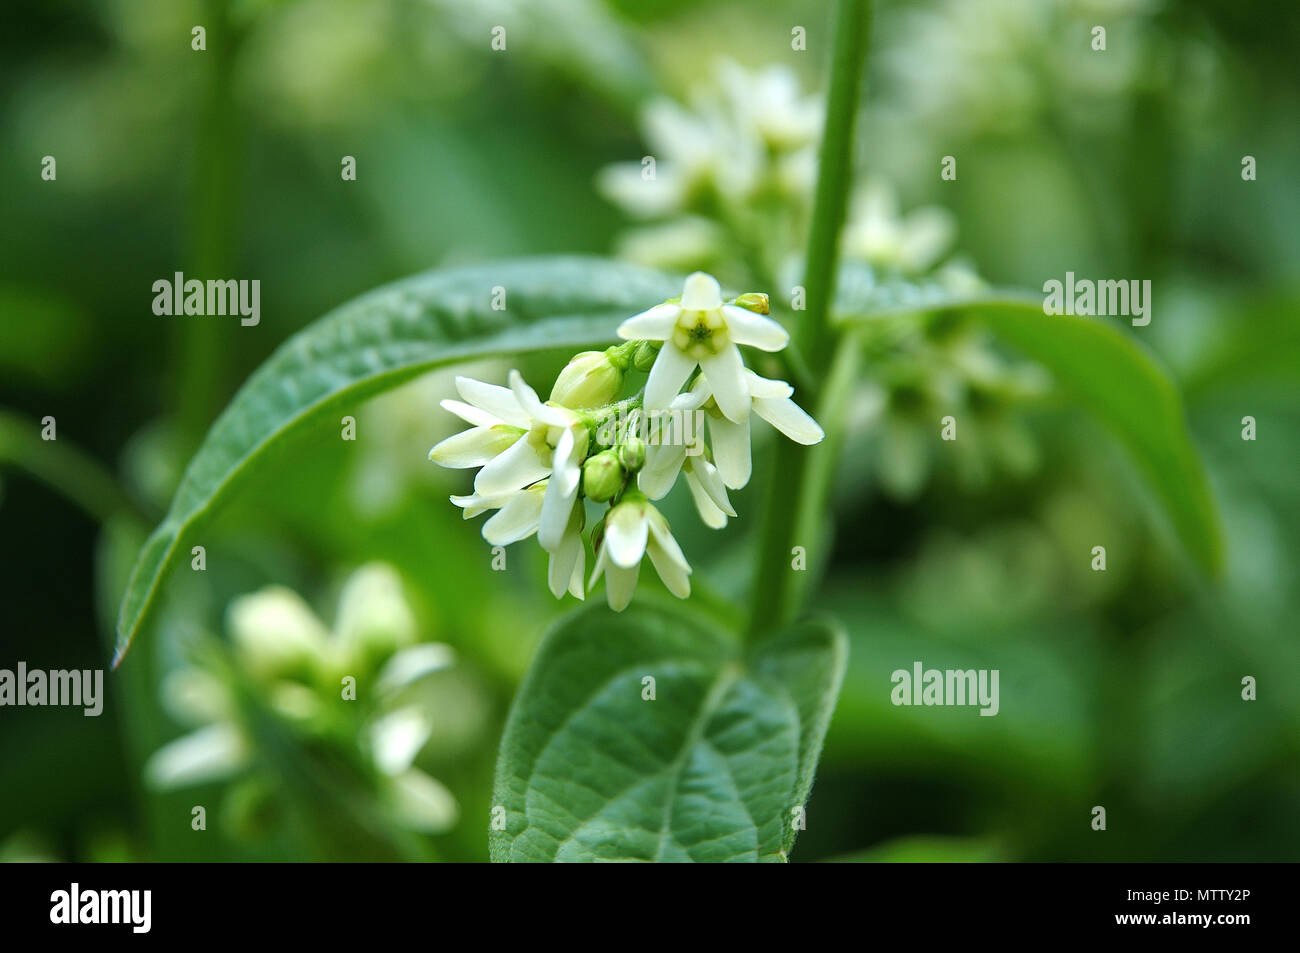 macrophotography of white blossoms and green leaves of vincetoxicum hirundinaria, a poisonous garden plant, traditionally used in herbal medicine and  Stock Photo